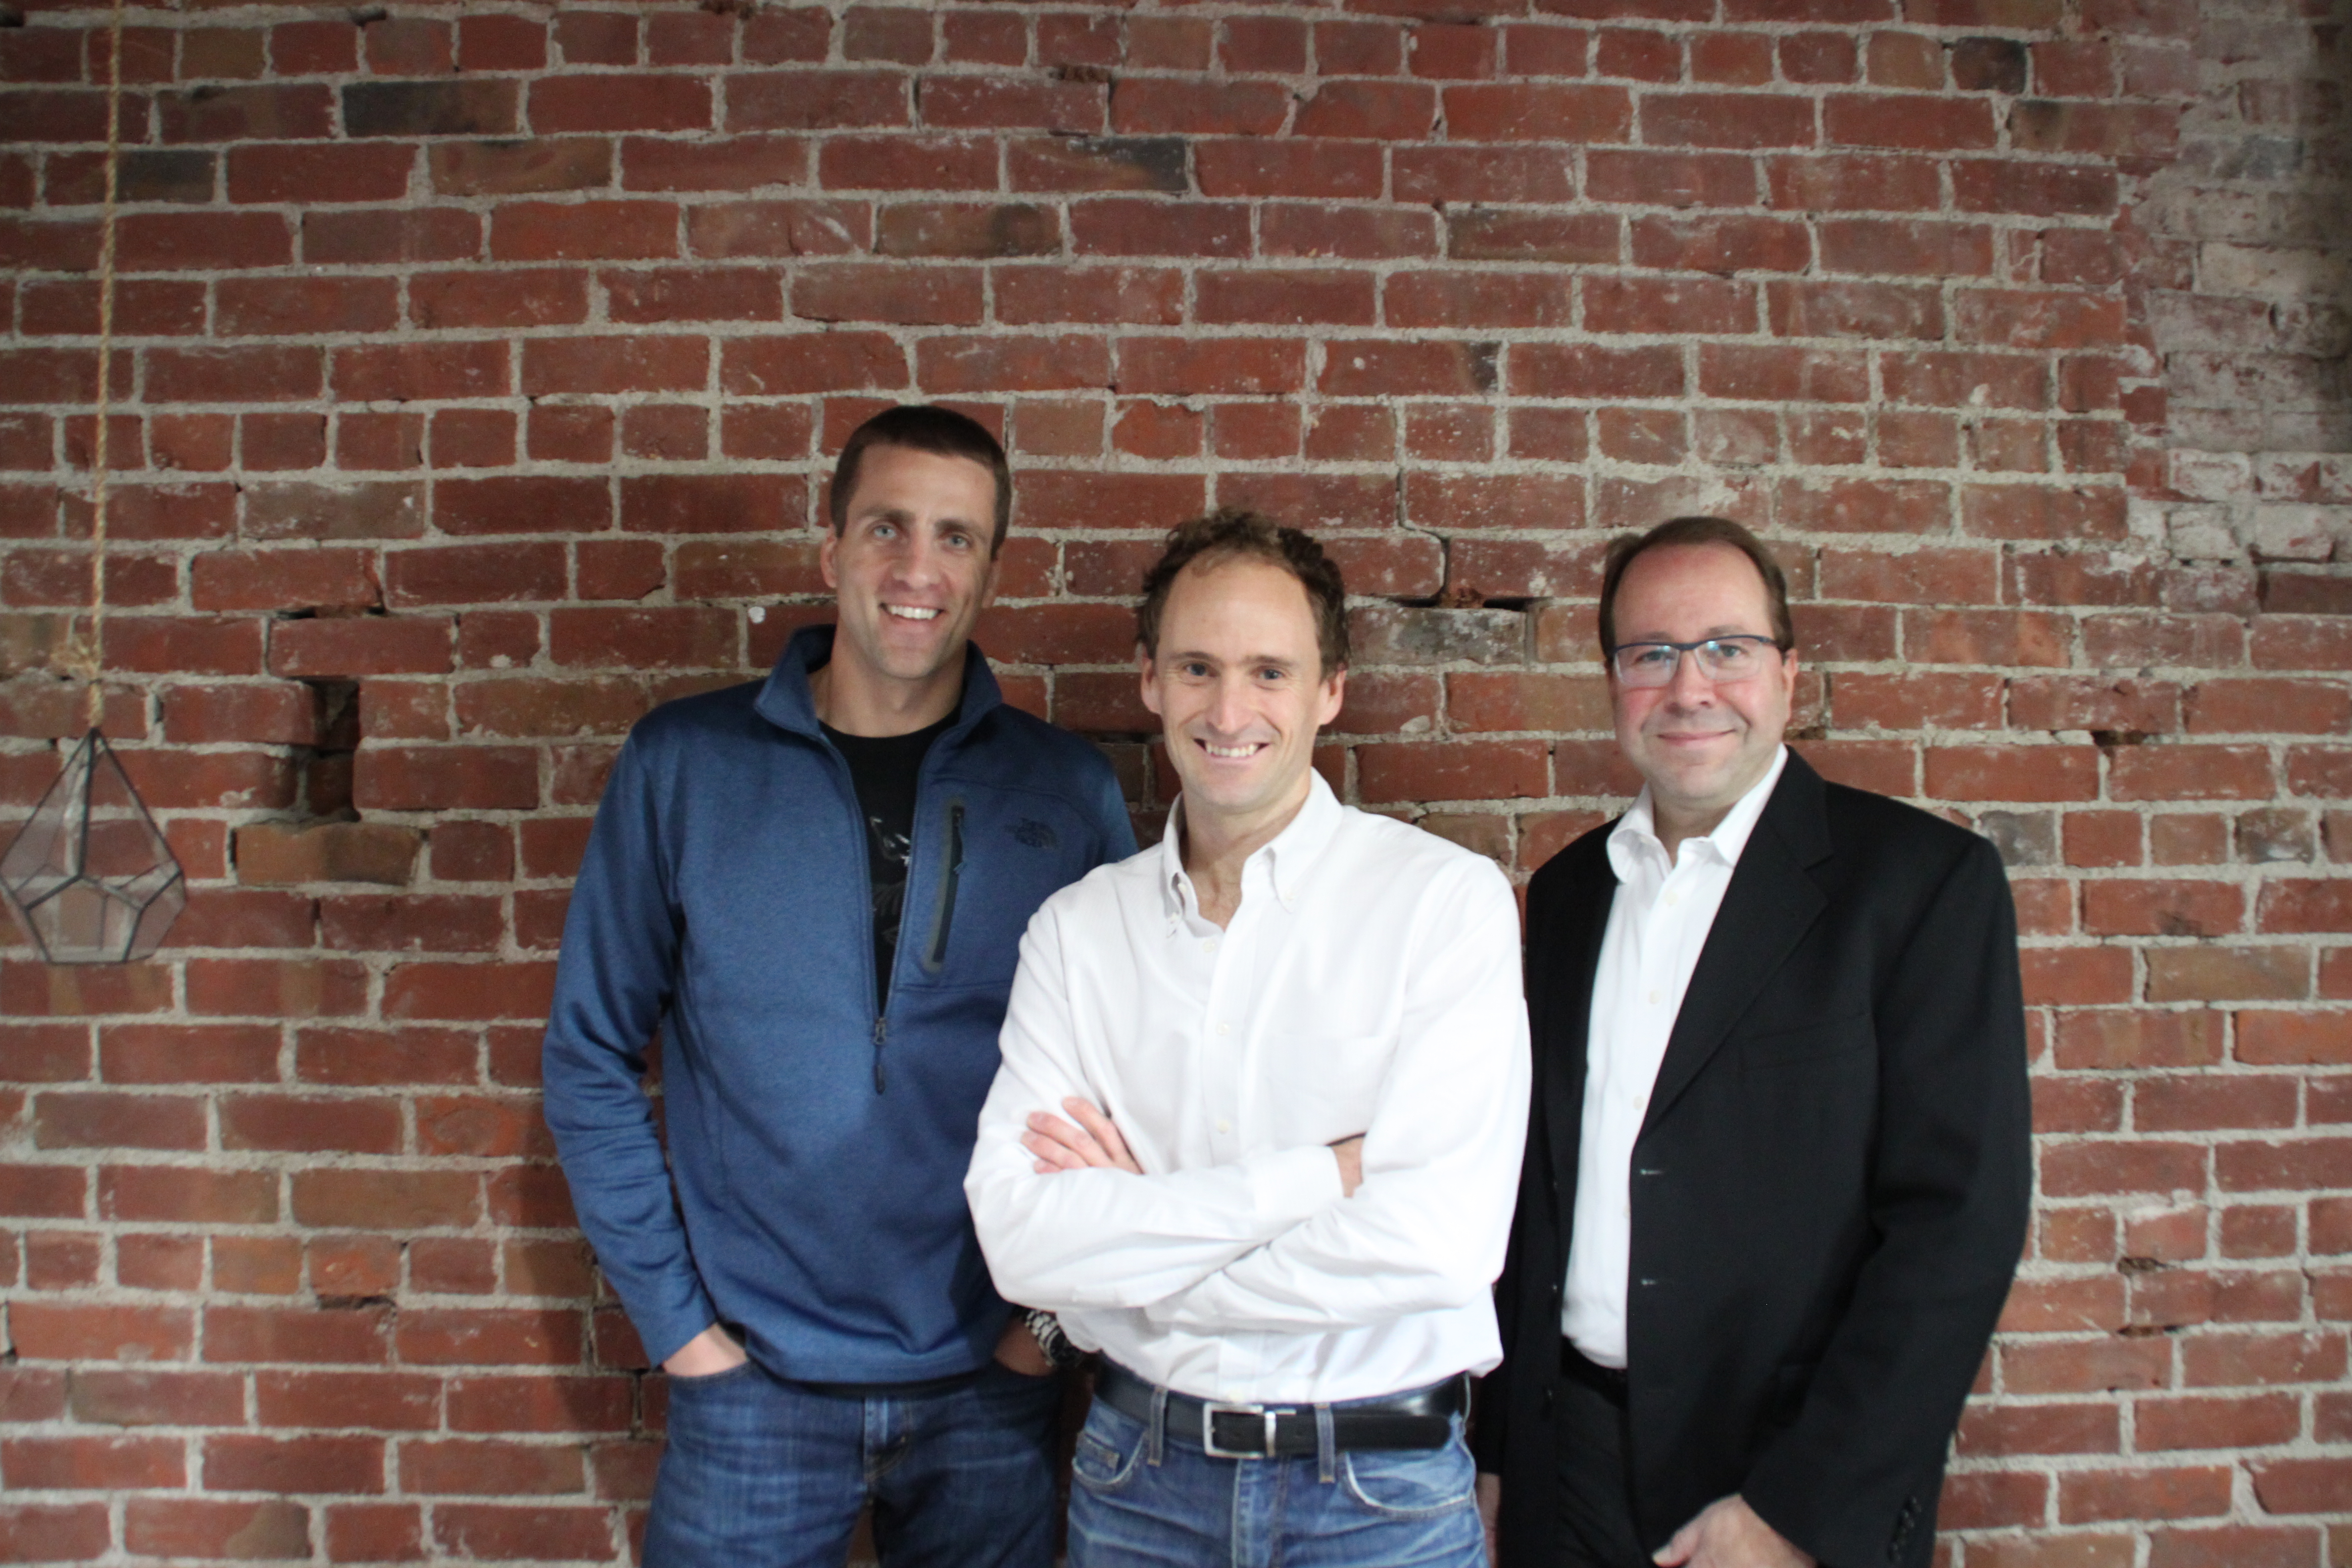 Tortuga Logic raises $2 million to build chip-level security systems